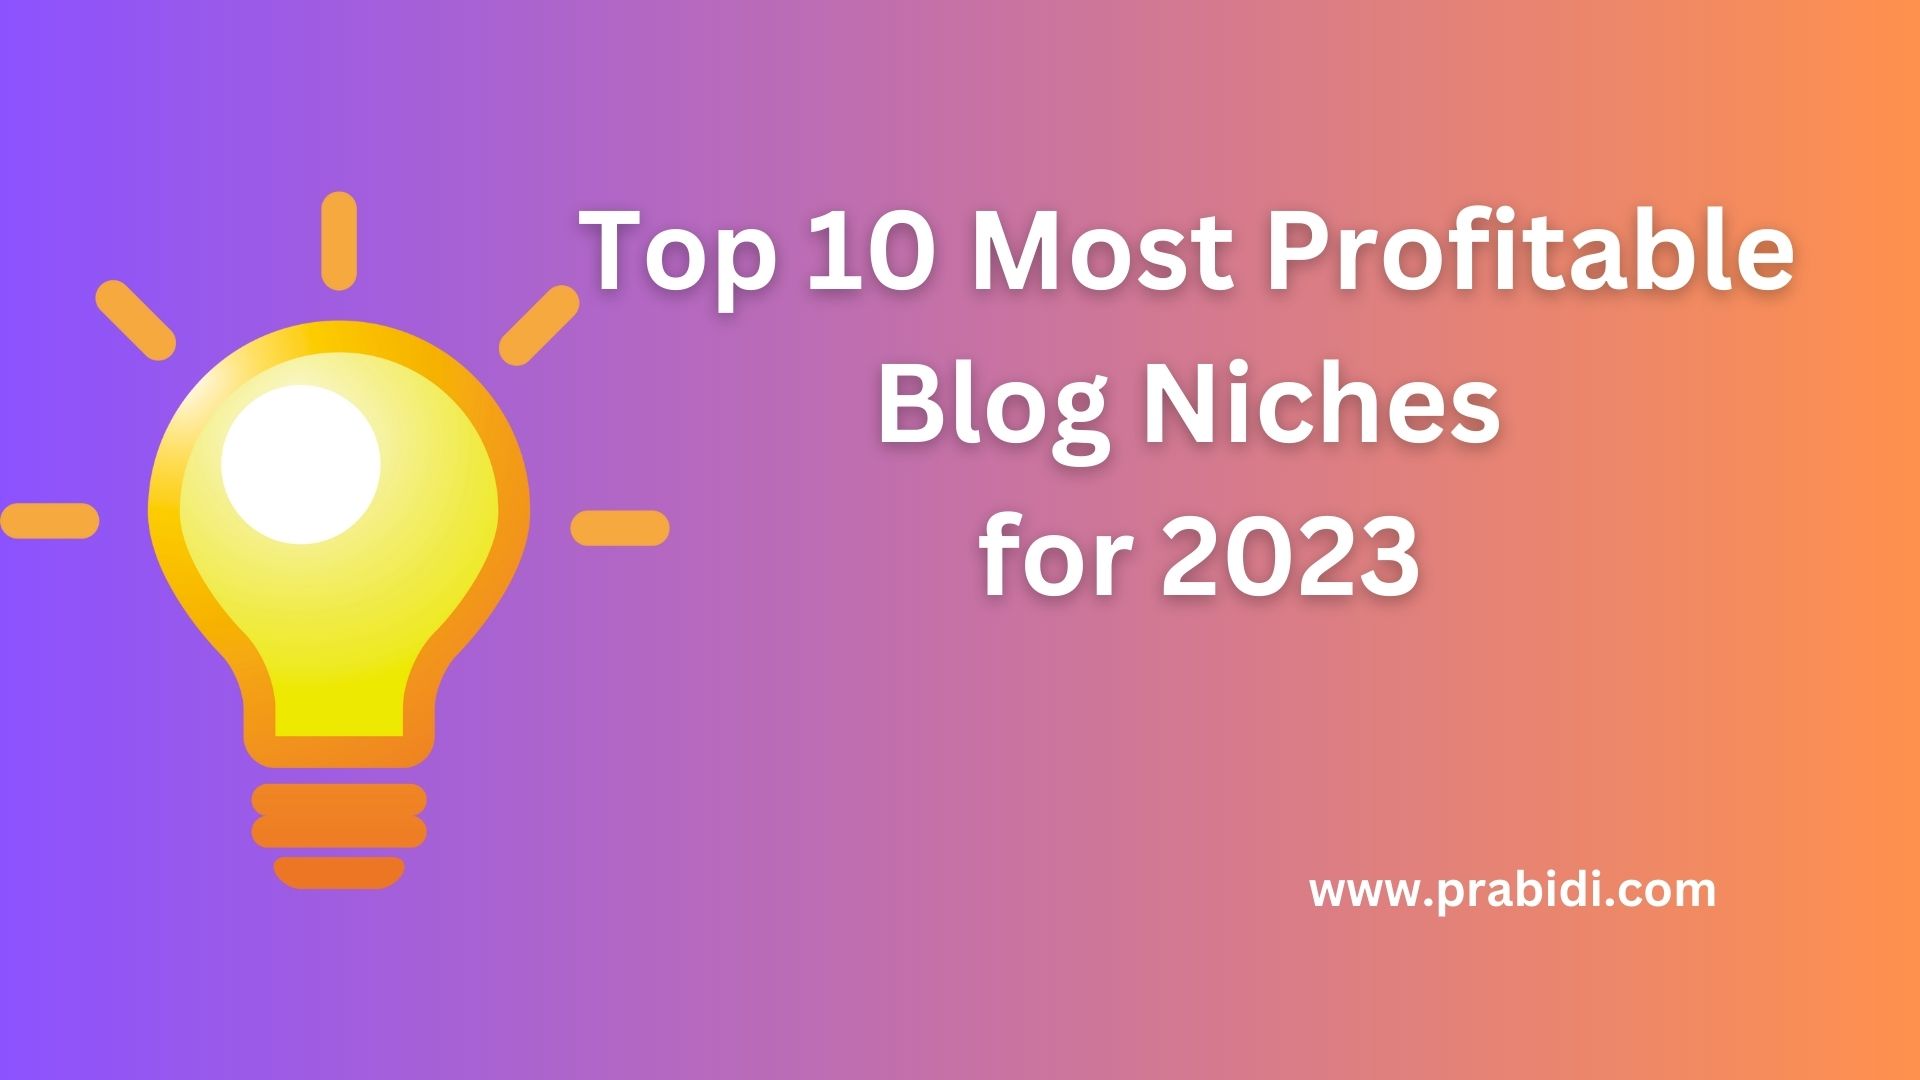 Top 10 Most Profitable Blog Niches for 2023 Prabidi Technology in